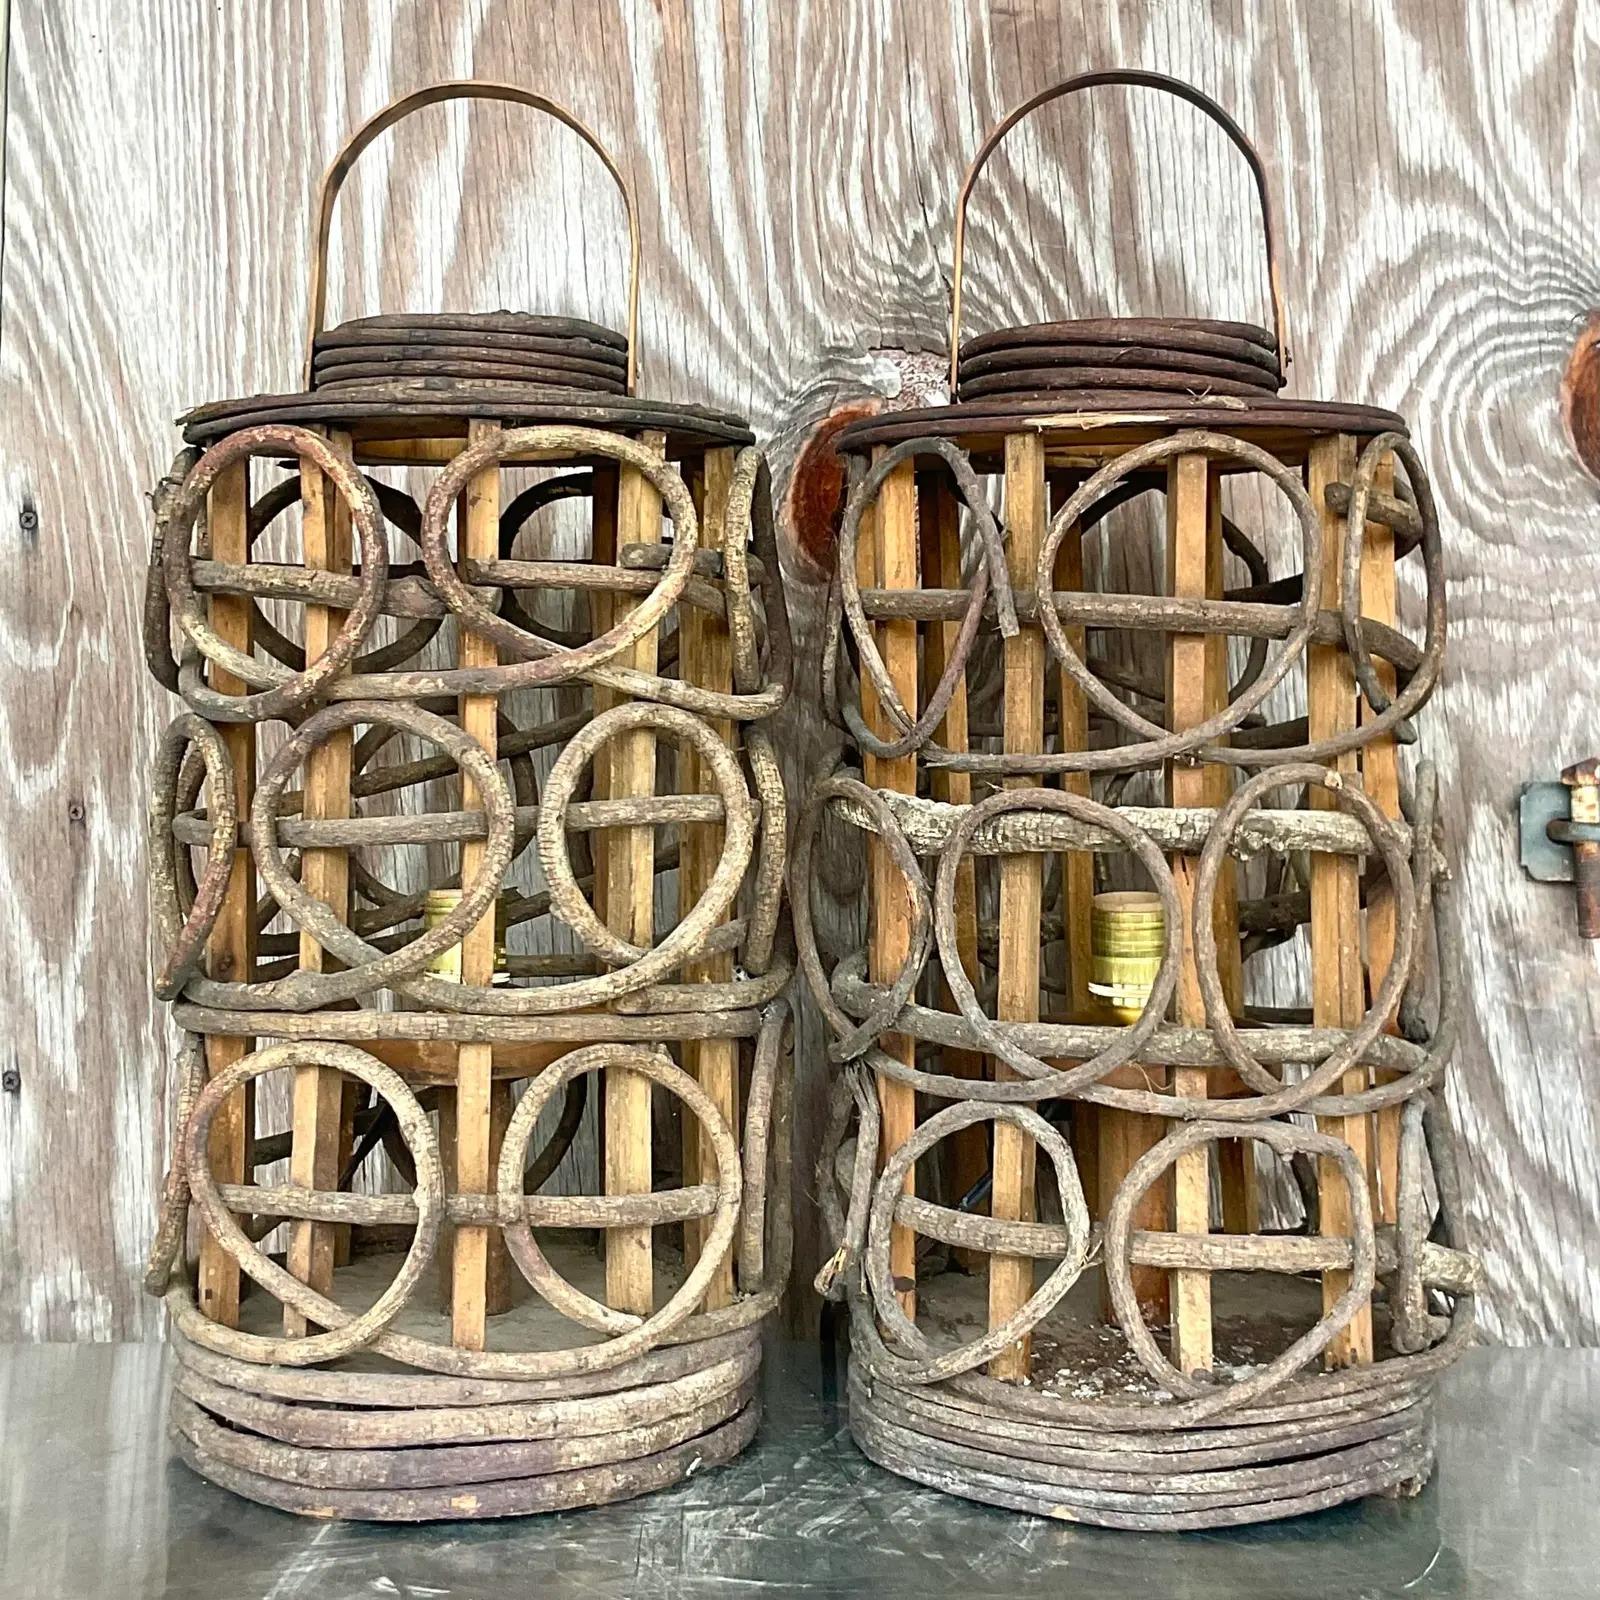 A fabulous pair of vintage Boho table lamps. Made from a twisted grape vine in a chic lantern shape. Fully restored with all new wiring and hardware. Acquired from a Palm Beach estate.

The lamps are in great vintage condition. Minor scuffs and